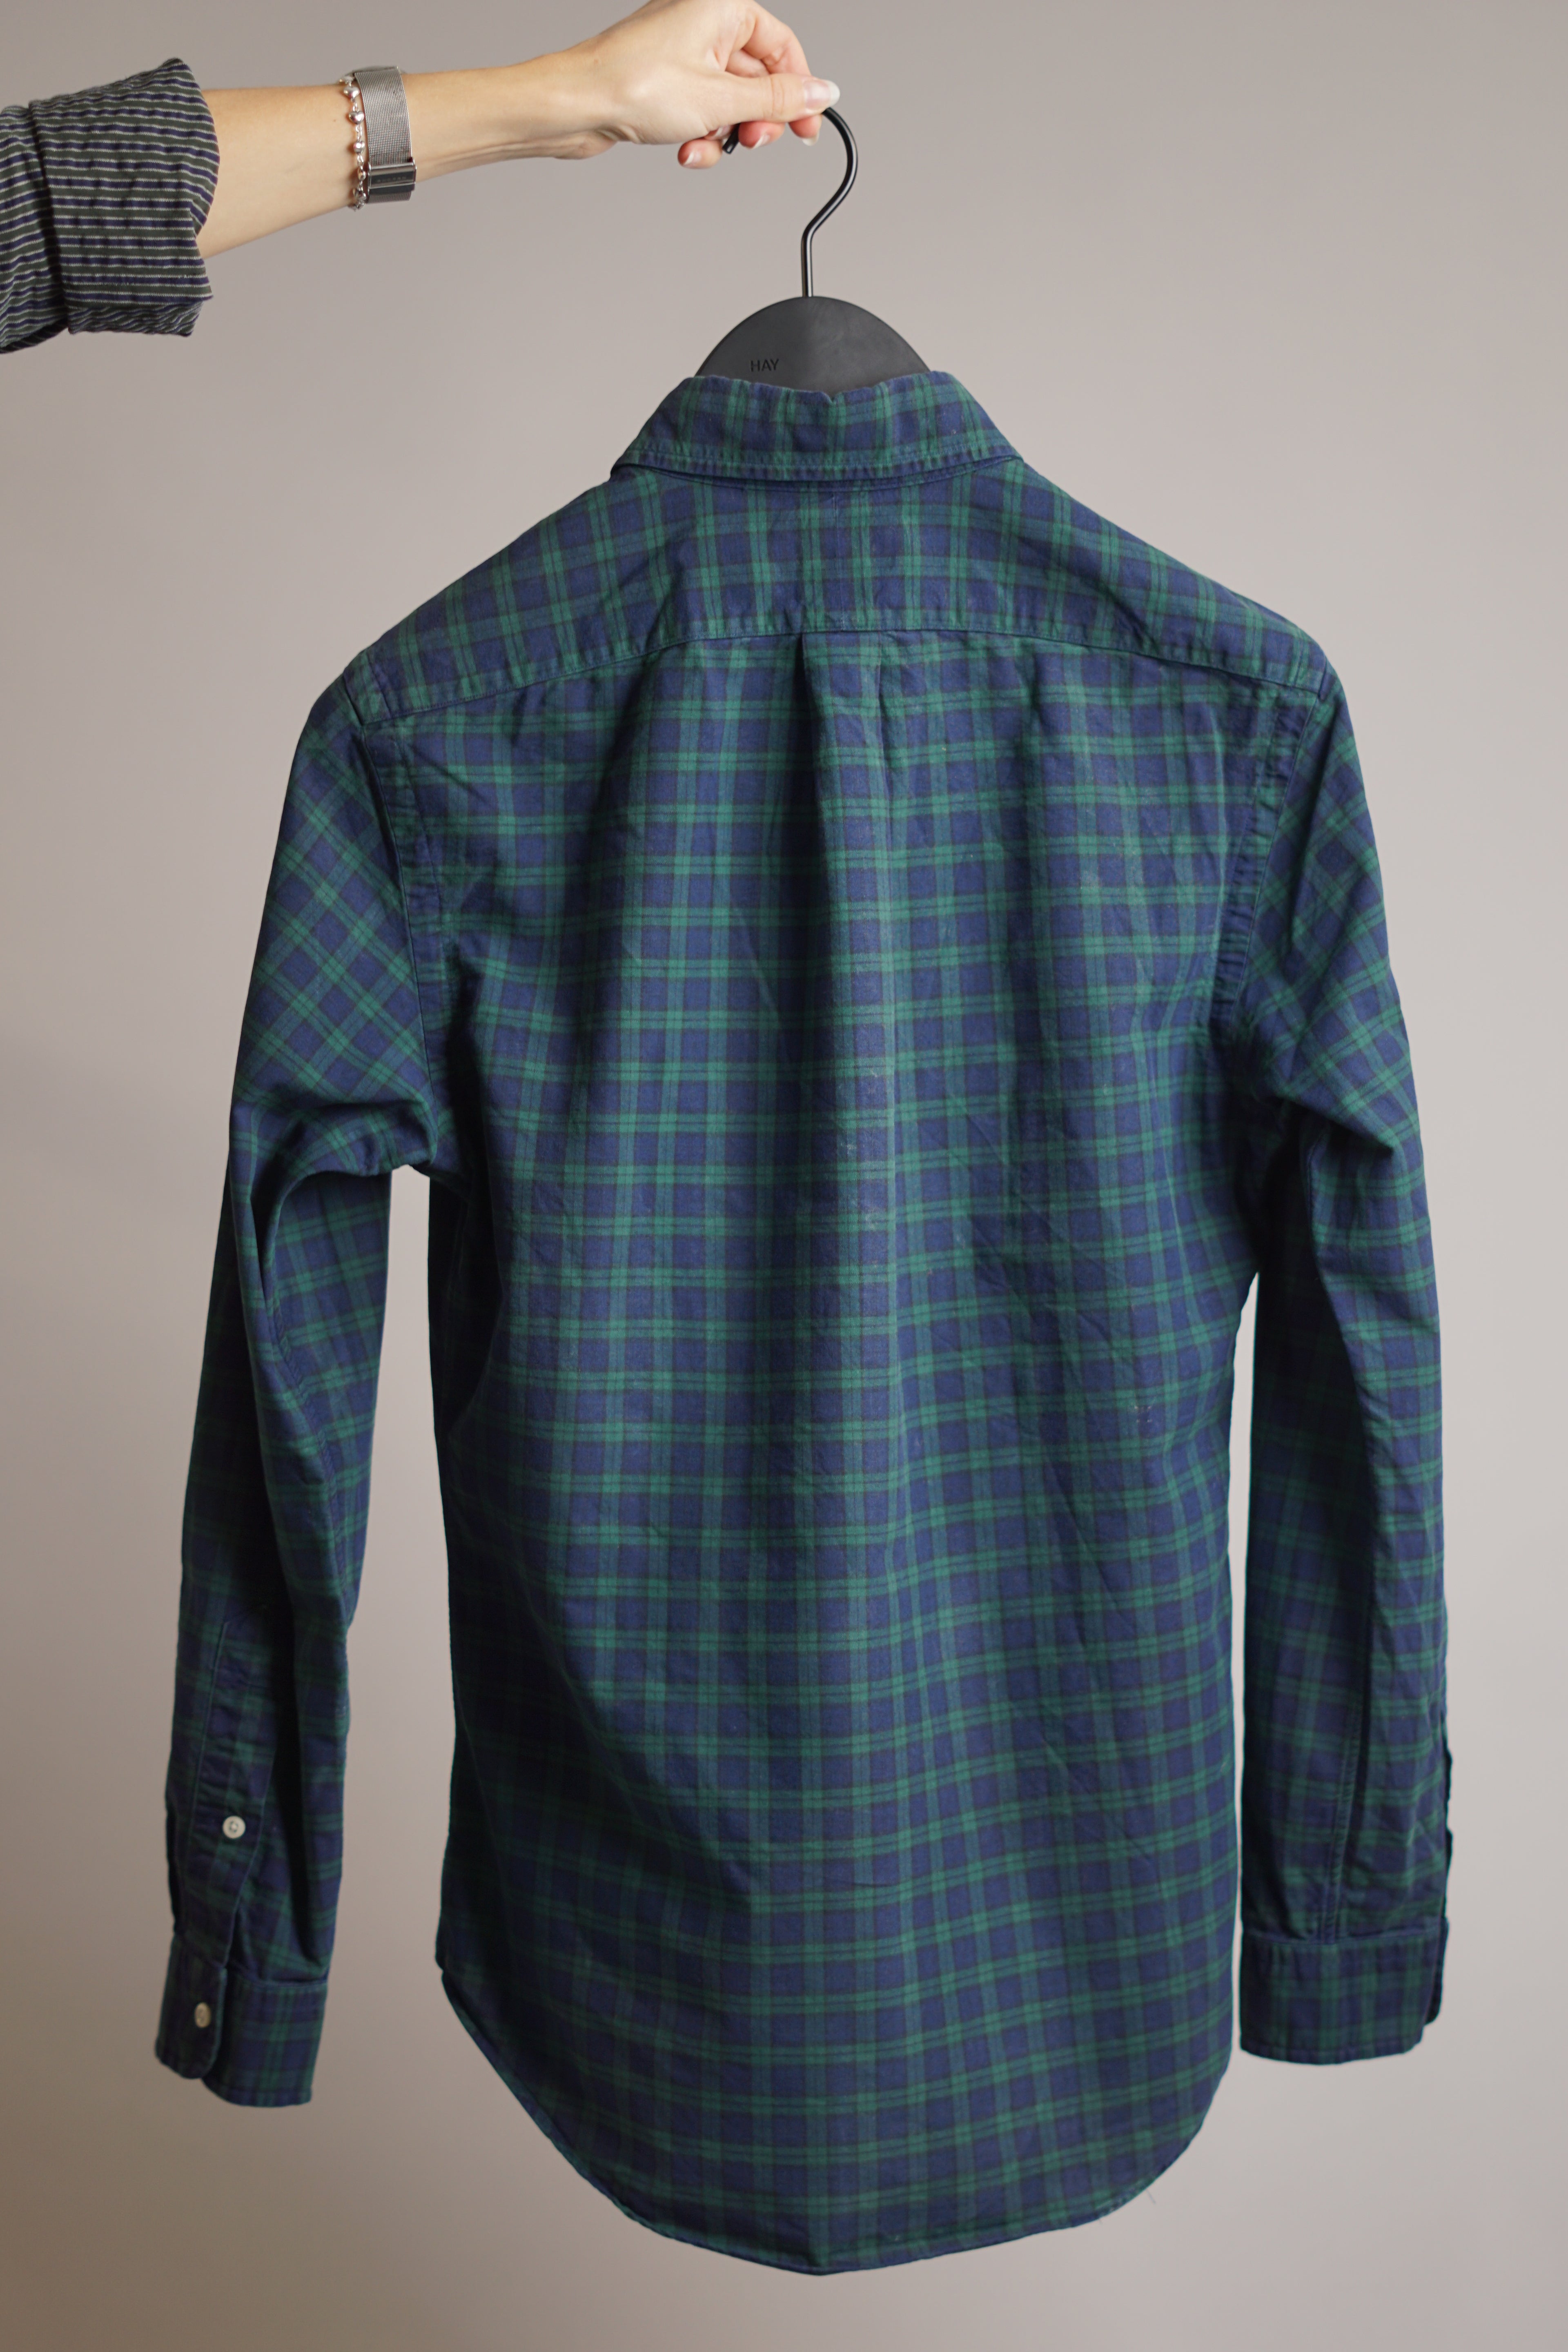 Polo Ralph Lauren Green and Navy Plaid Slim Fit Shirt